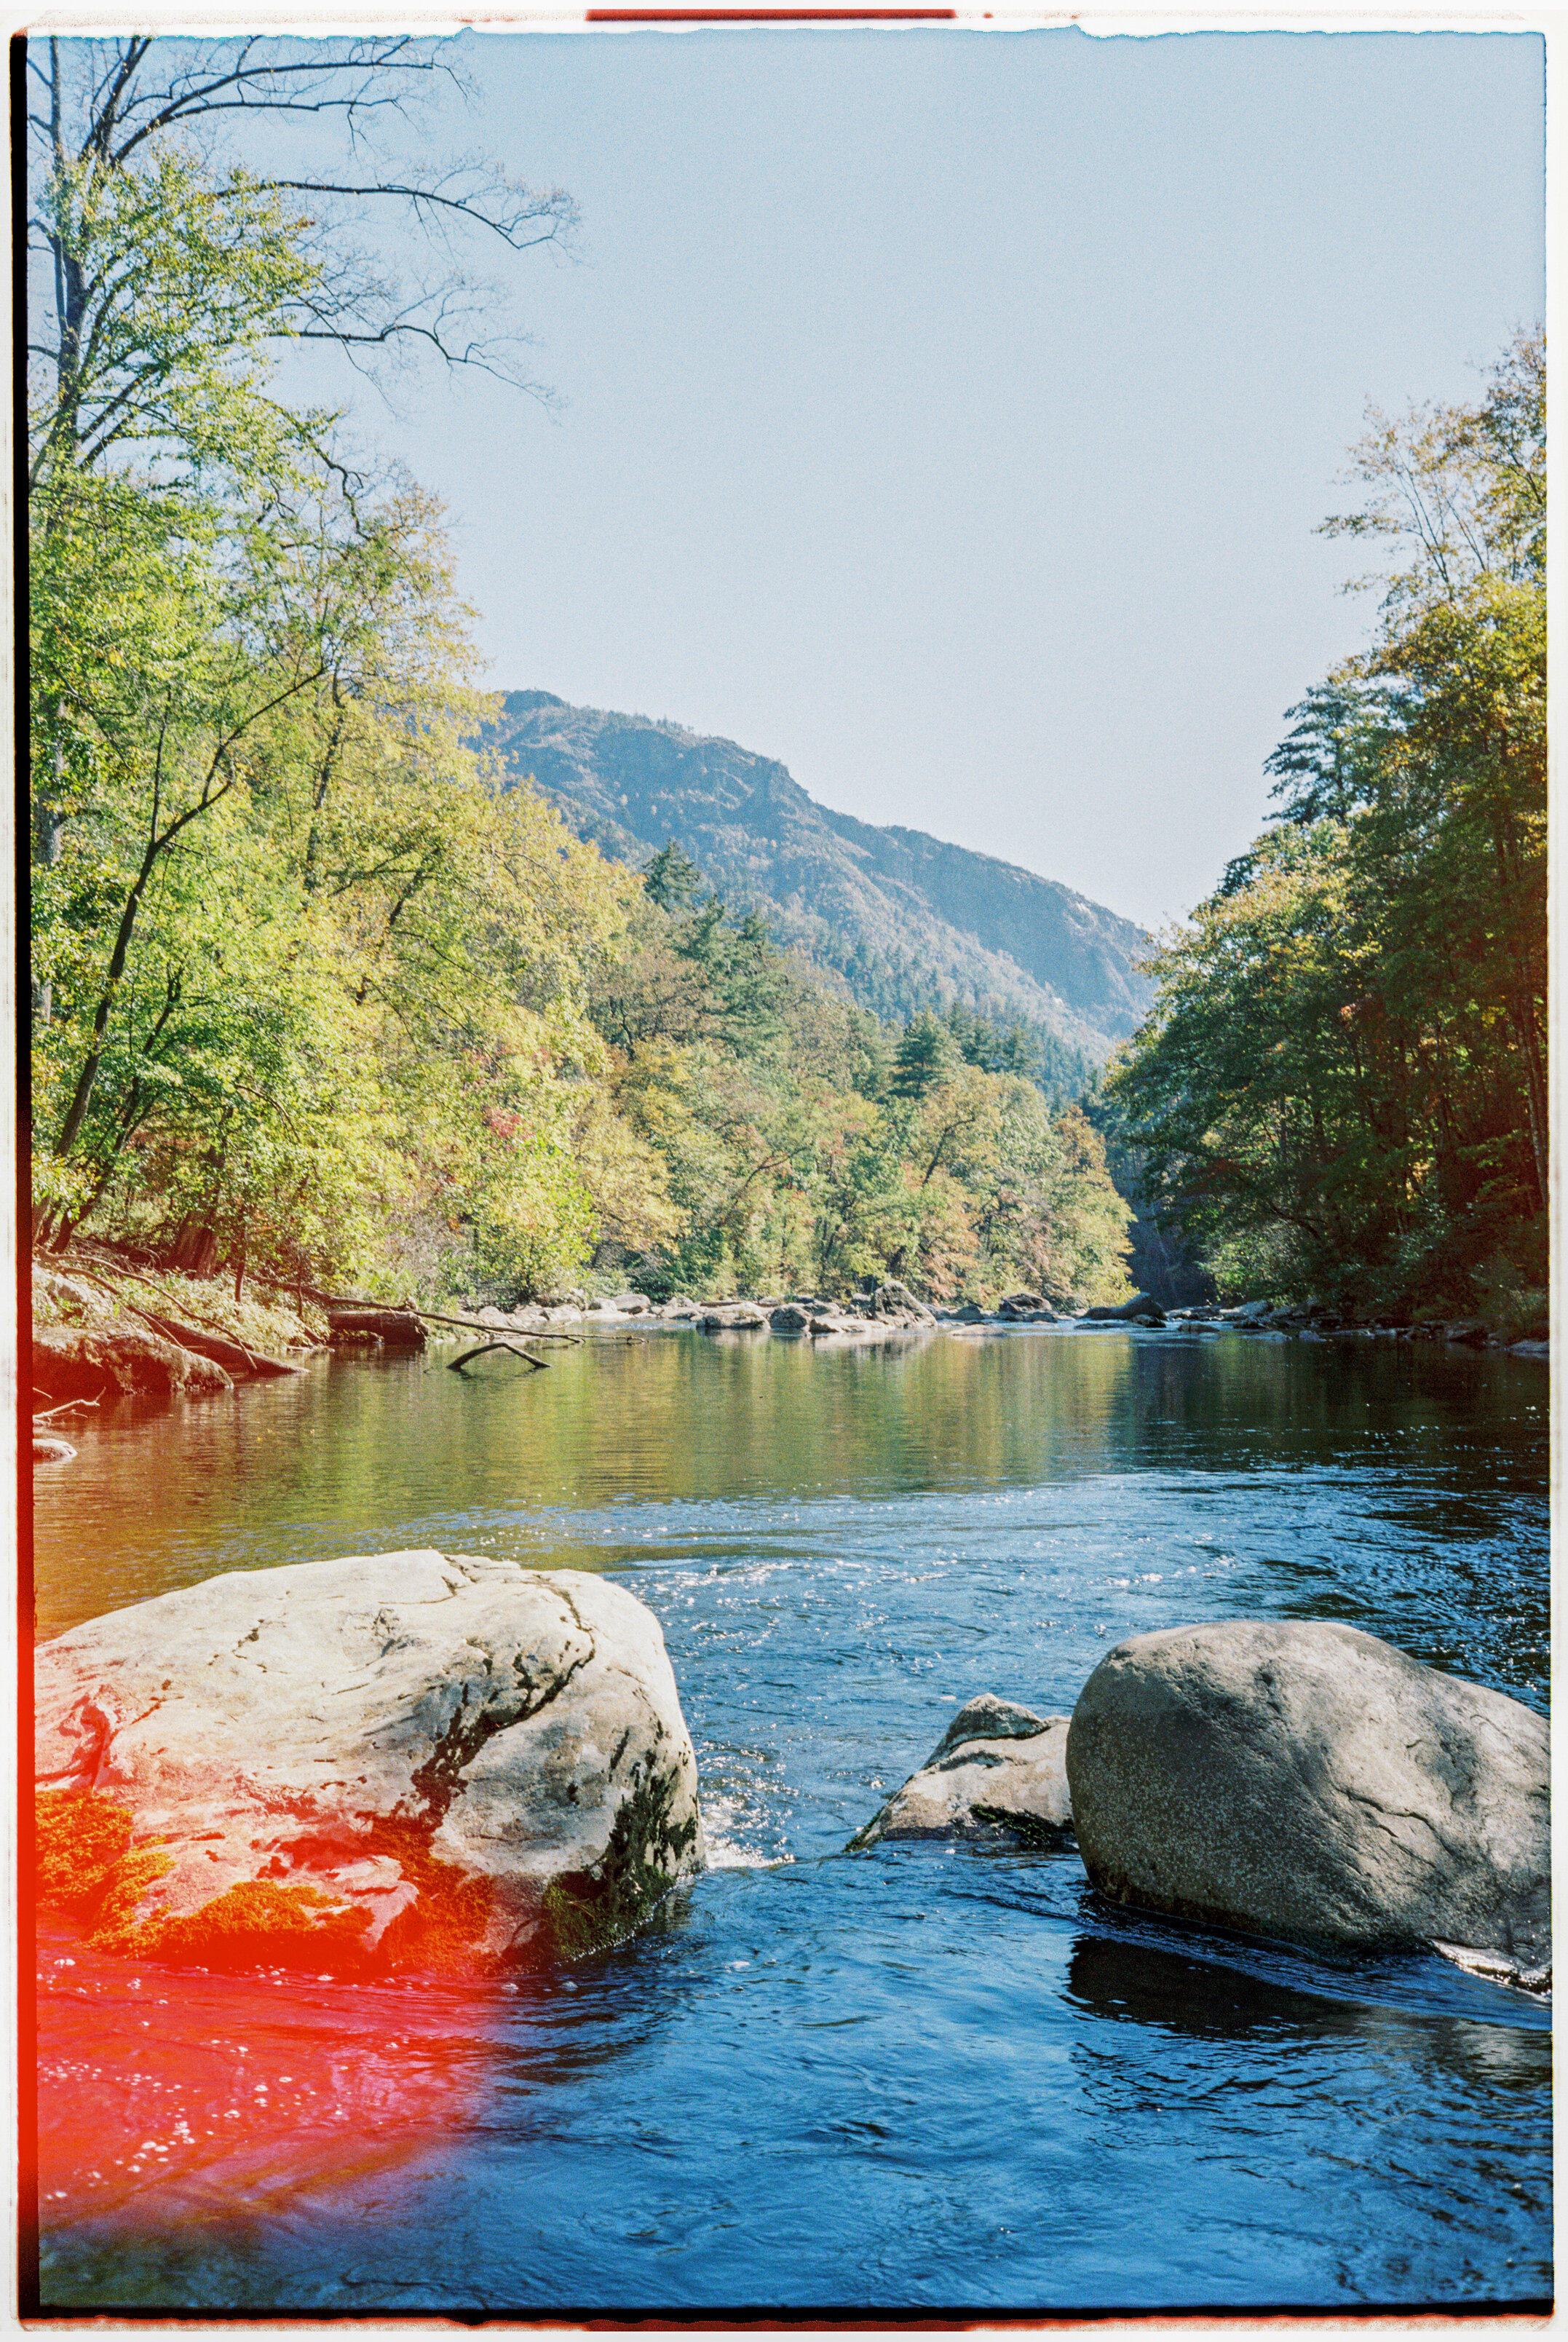 Linville Gorge Wilderness, 2020